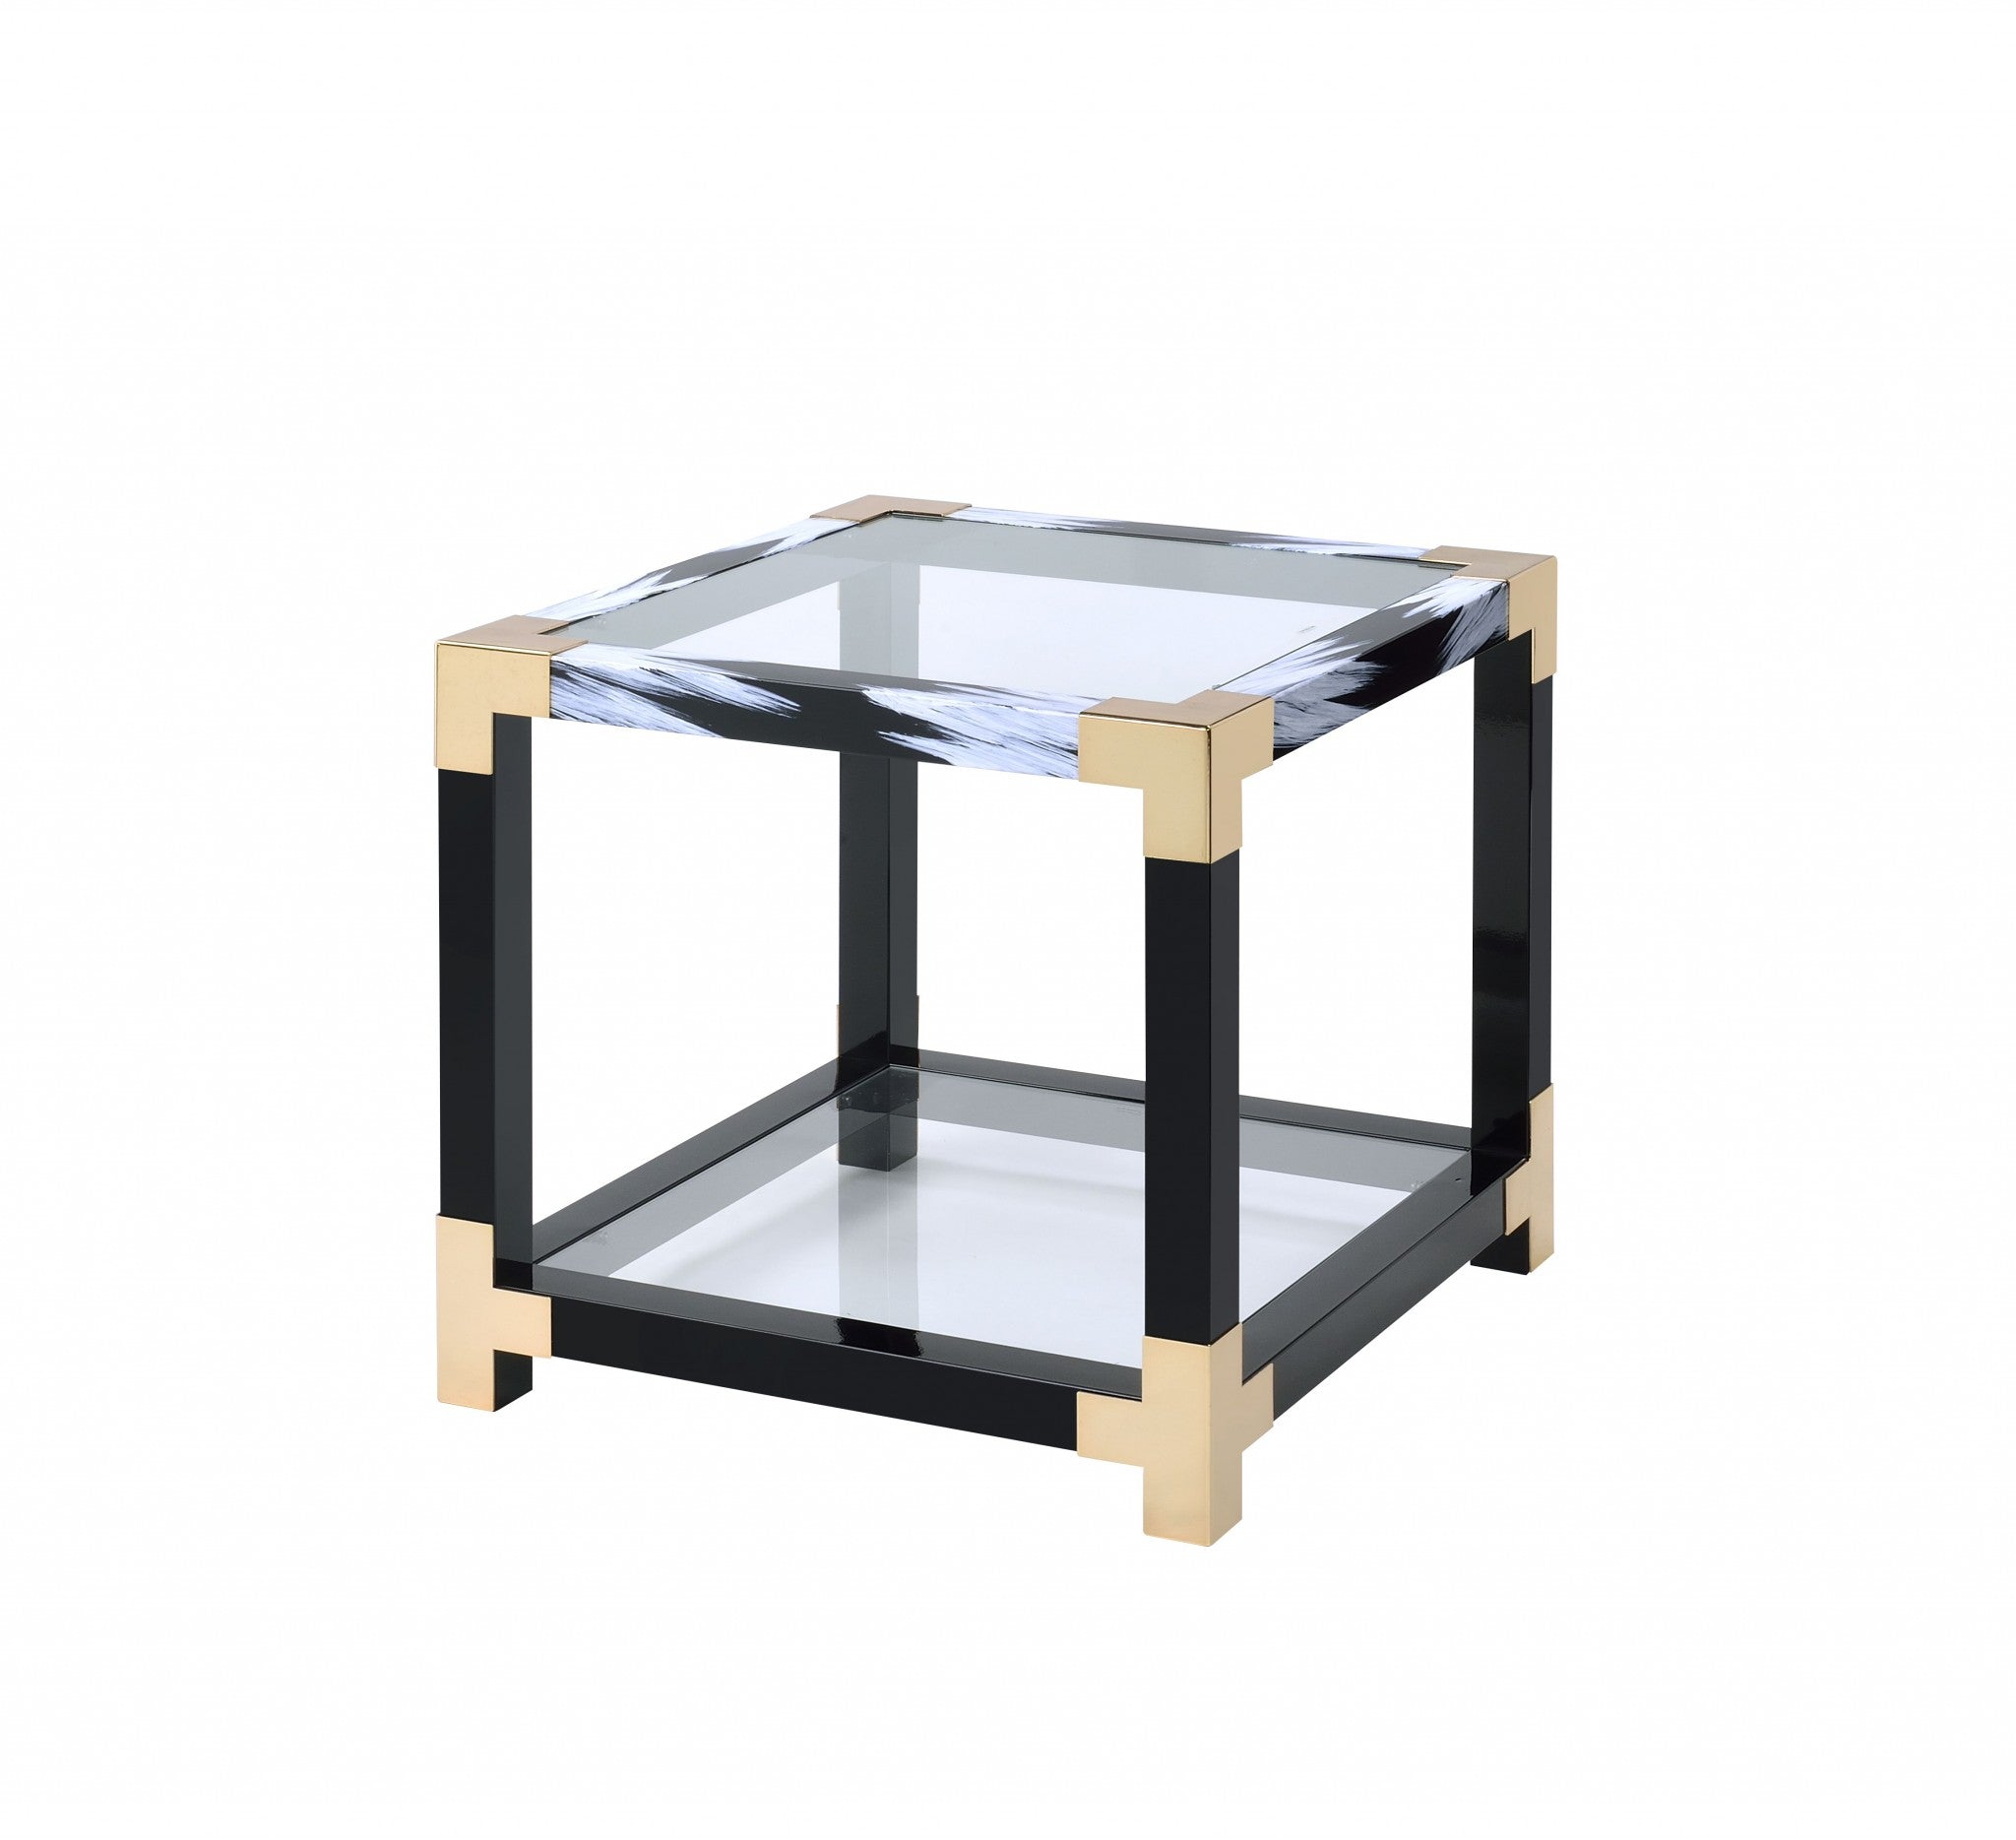 25" Black and Gold And Clear Glass Square End Table With Shelf With Magazine Holder